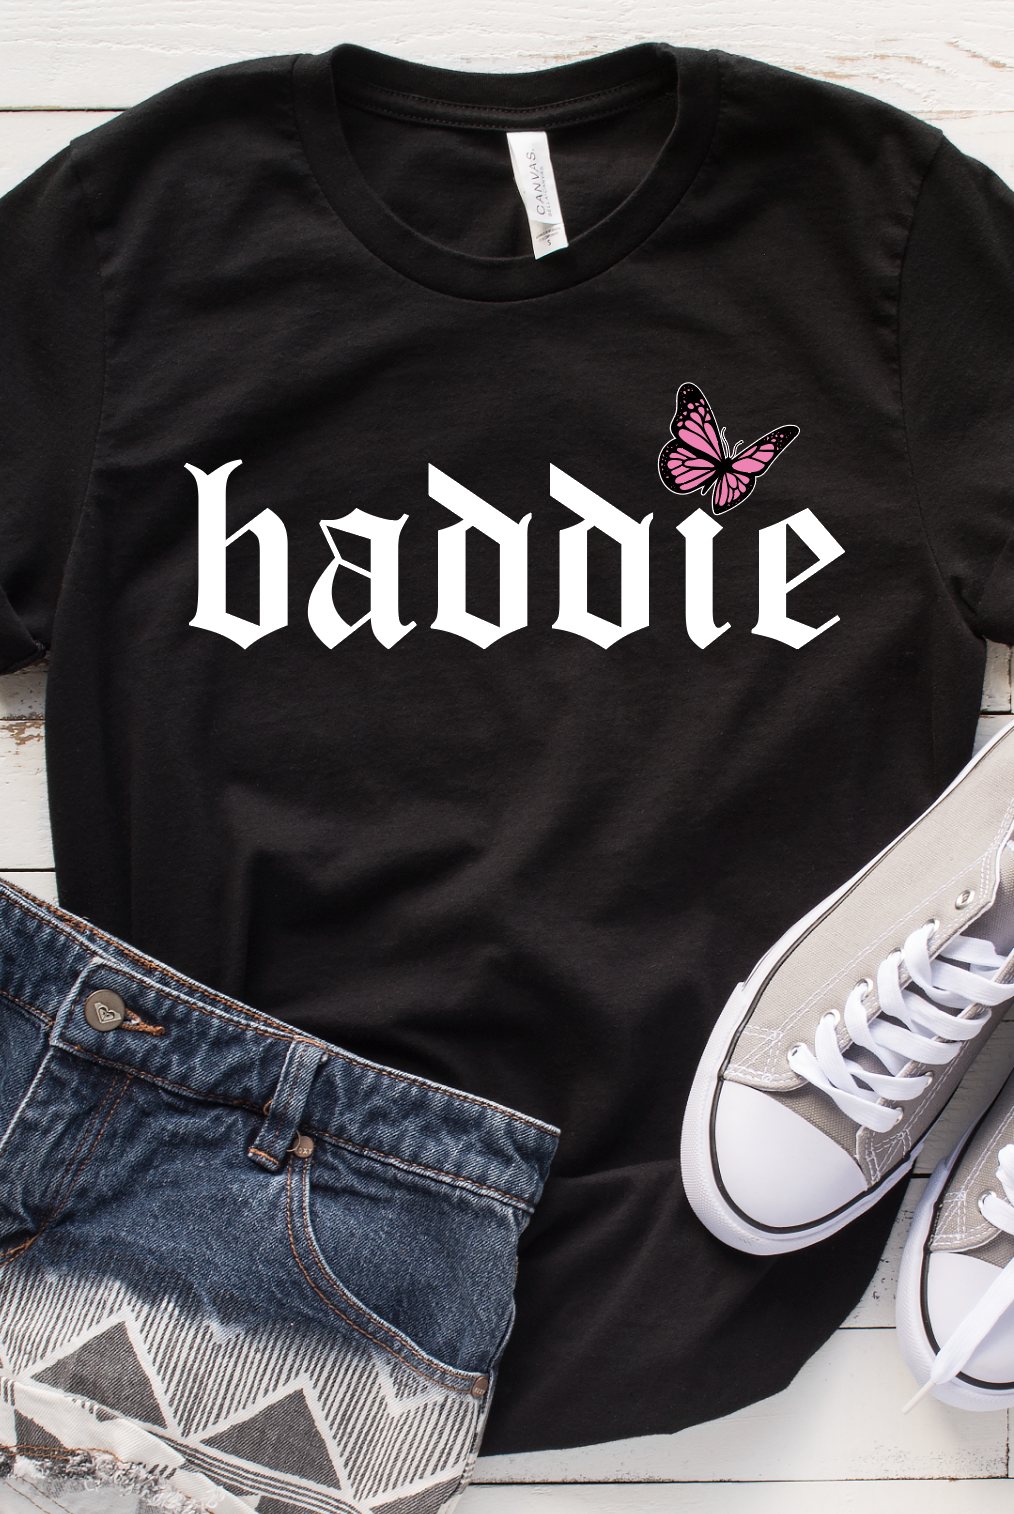 Baddie- Simply Simpson's Boutique is a Women's Online Fashion Boutique Located in Jupiter, Florida